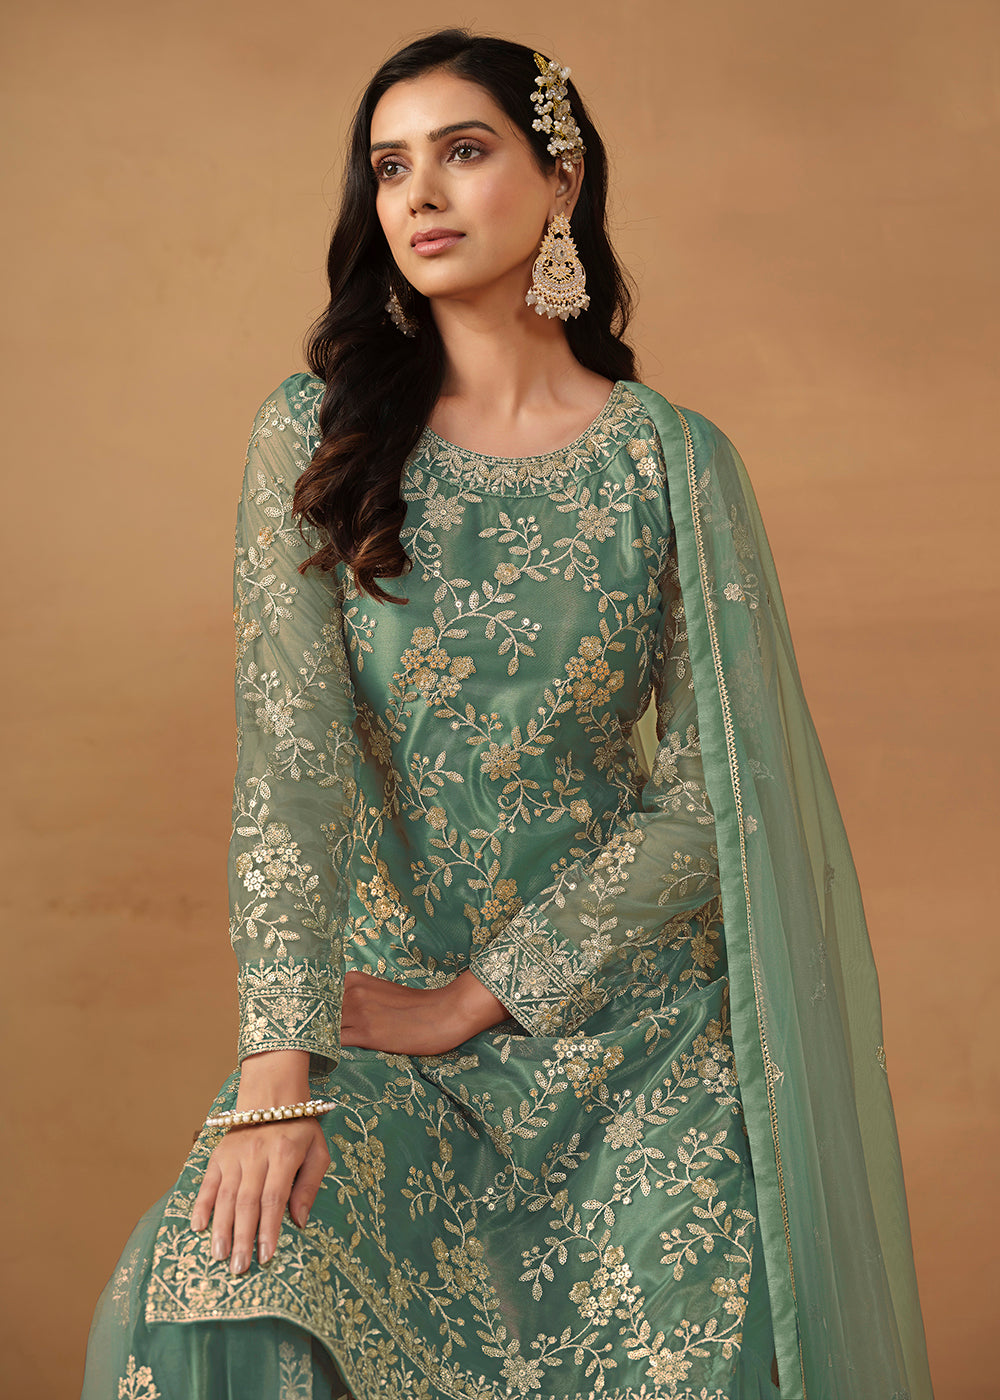 Shop Now Sea Green Net Embroidered Wedding Festive Gharara Suit Online at Empress Clothing in USA, UK, Canada, Italy & Worldwide.